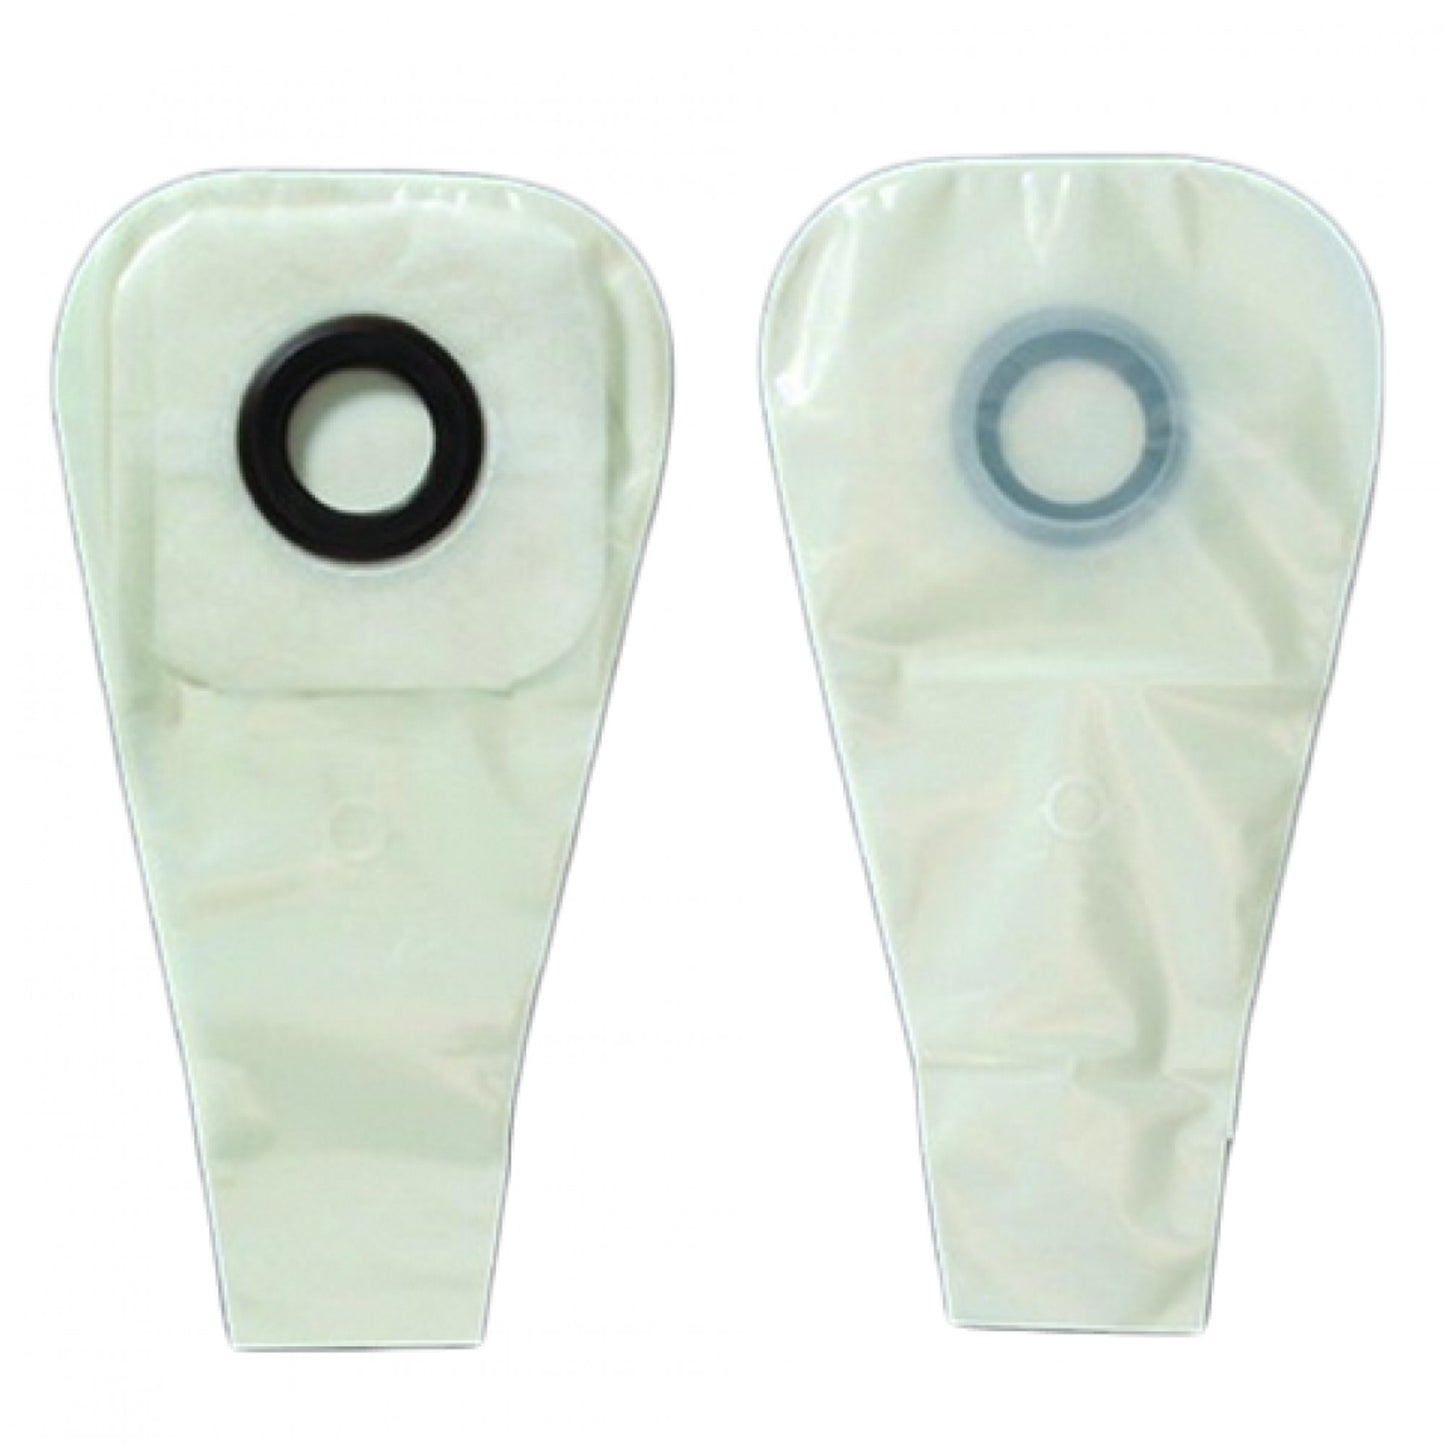 Karaya 5 One-Piece Drainable Transparent Colostomy Pouch, 12 Inch Length, 5/8 Inch Stoma, 30 ct